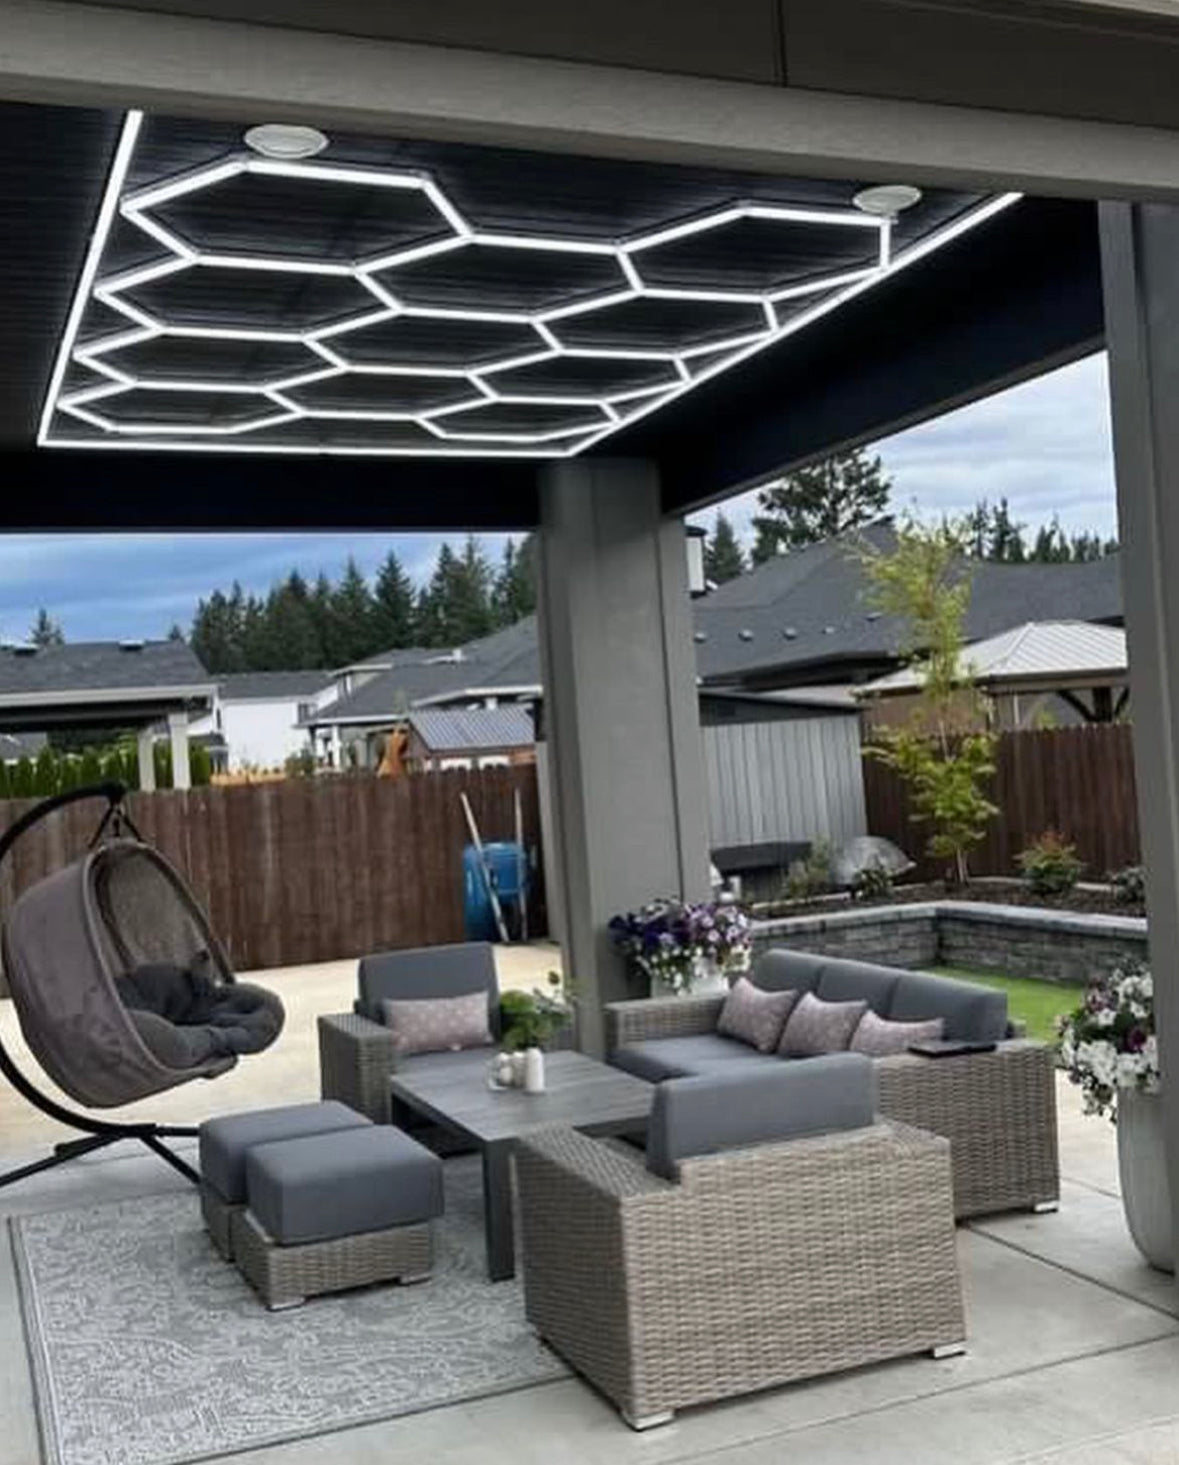 Brighter Side Lighting HIVE Hexagon LED Lighting with Border on Outdoor Patio